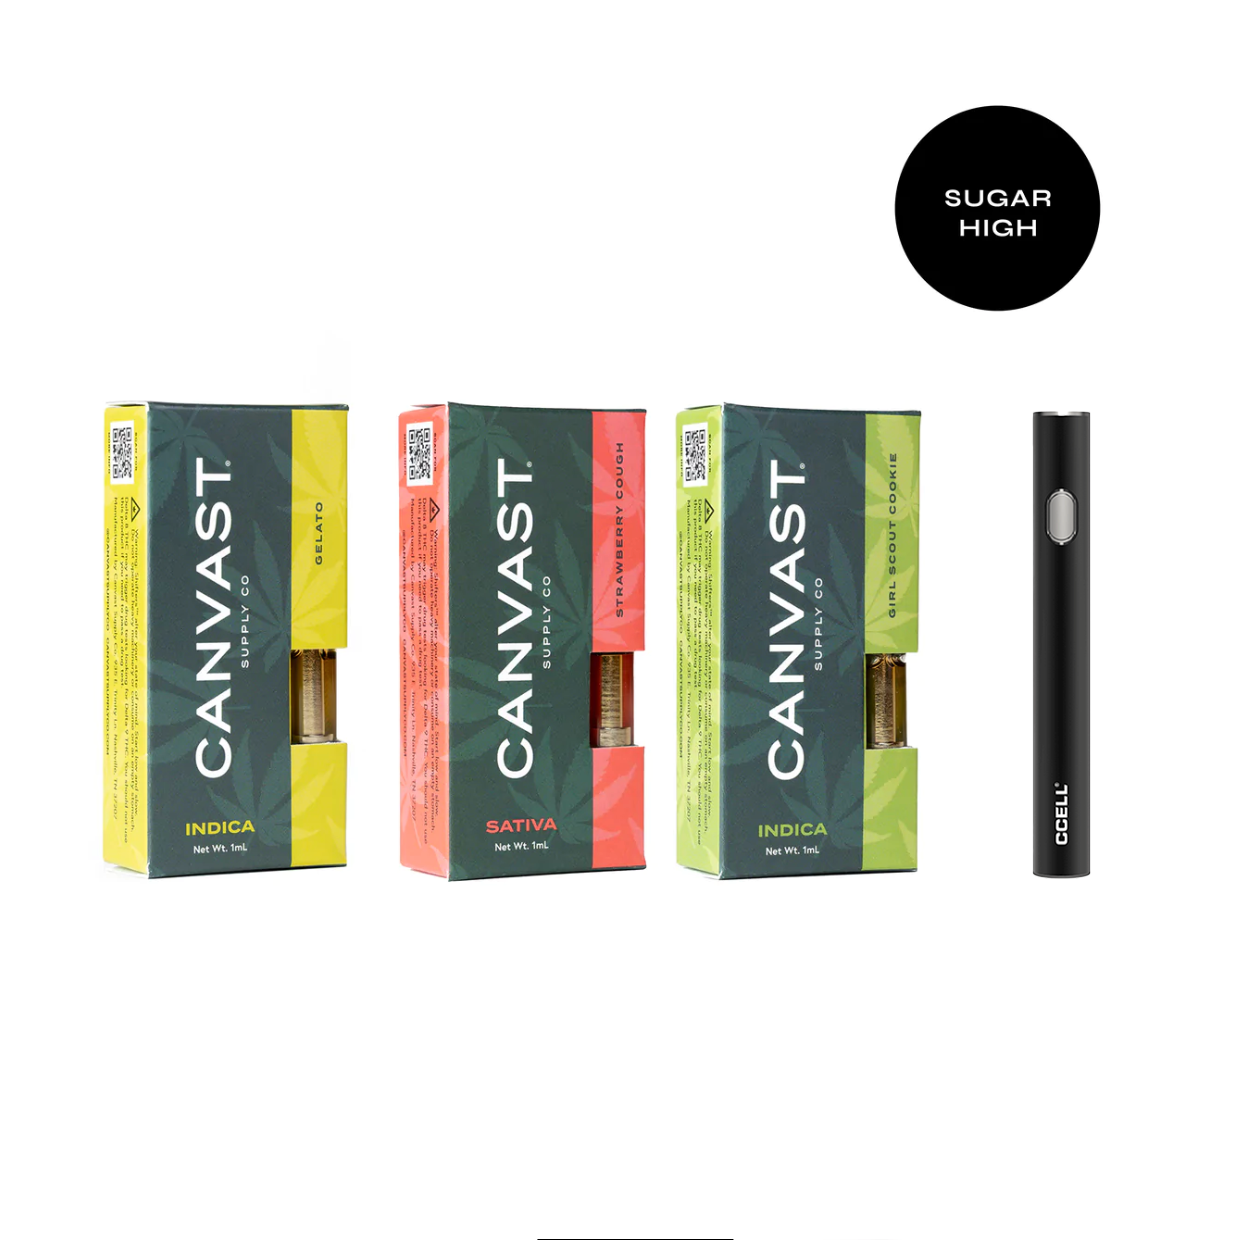 A line up of three vape cartridges and a c-cell 510 thread battery featuring Gelato terpenes, Strawberry Cough terpenes and Girl Scout Cookies Terpenes in indica and sativa varieties.